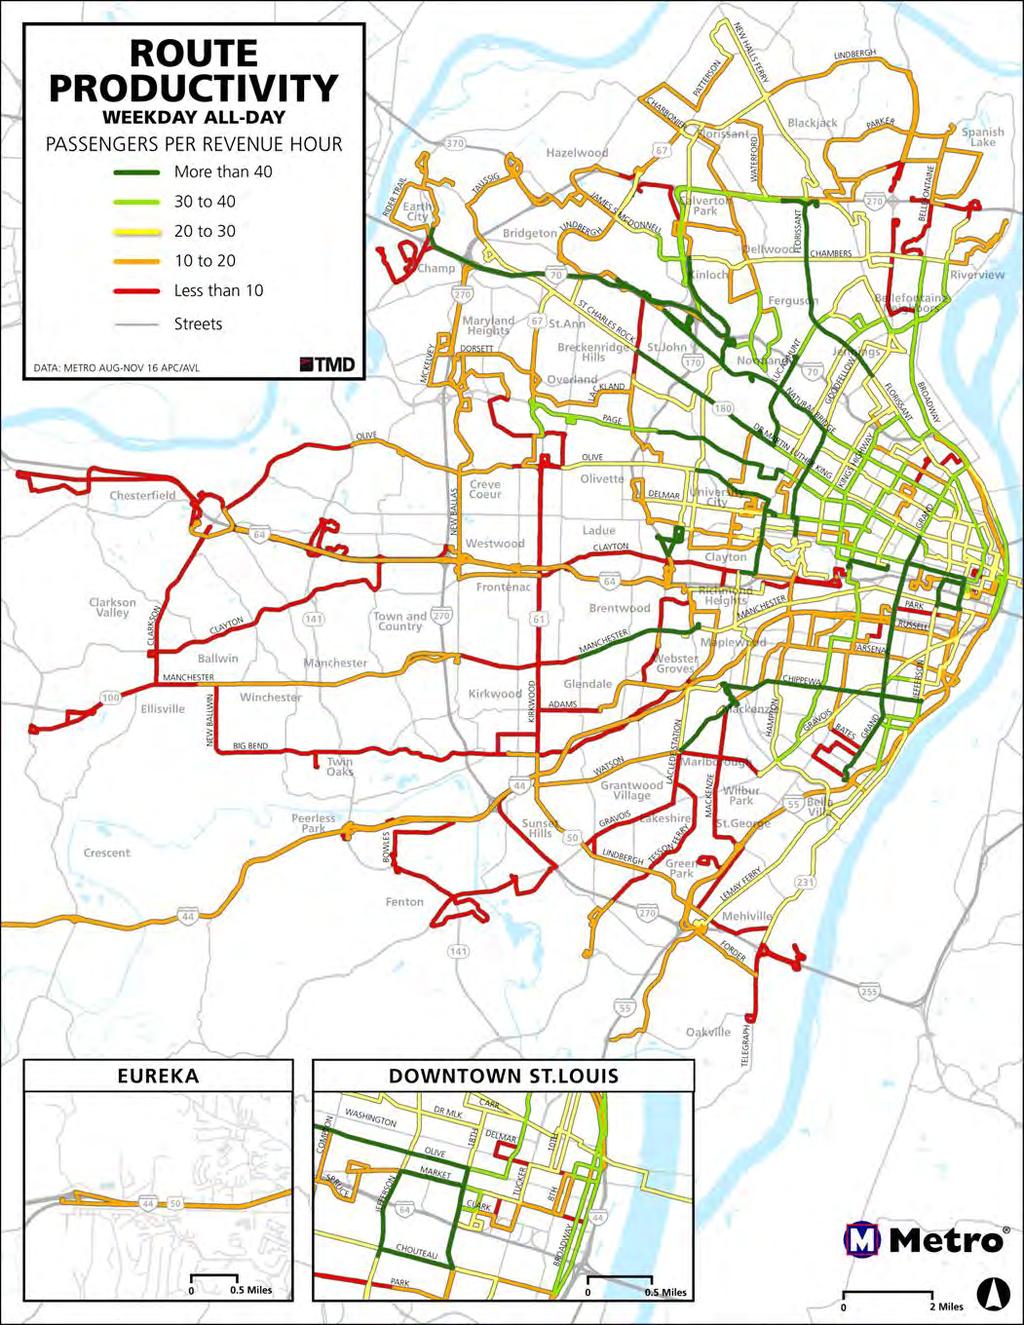 Today s Key Corridors Examined productivity of different route sections, not just full routes Top ten